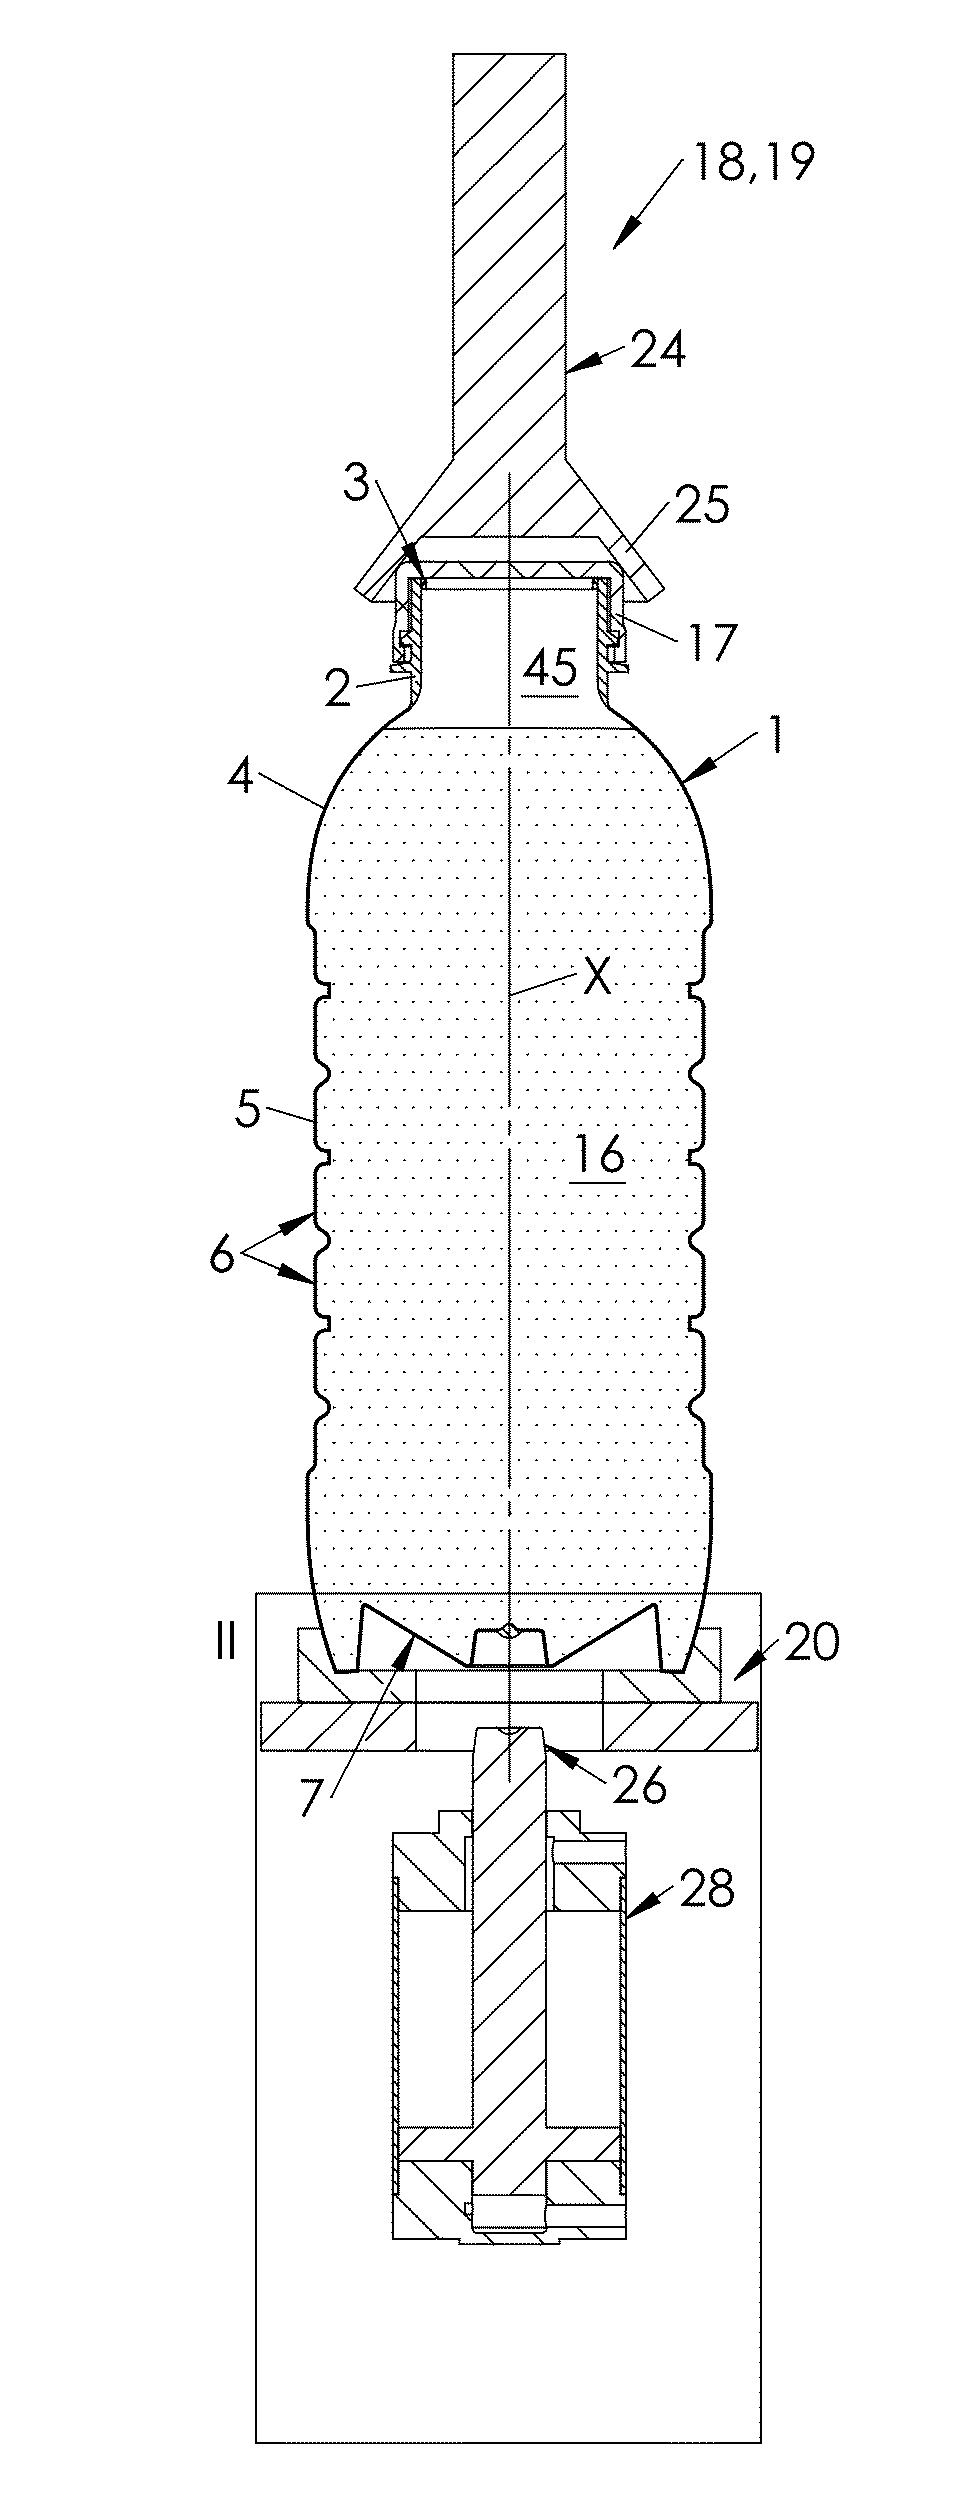 Machine and method for processing filled containers having an invertible diaphragm